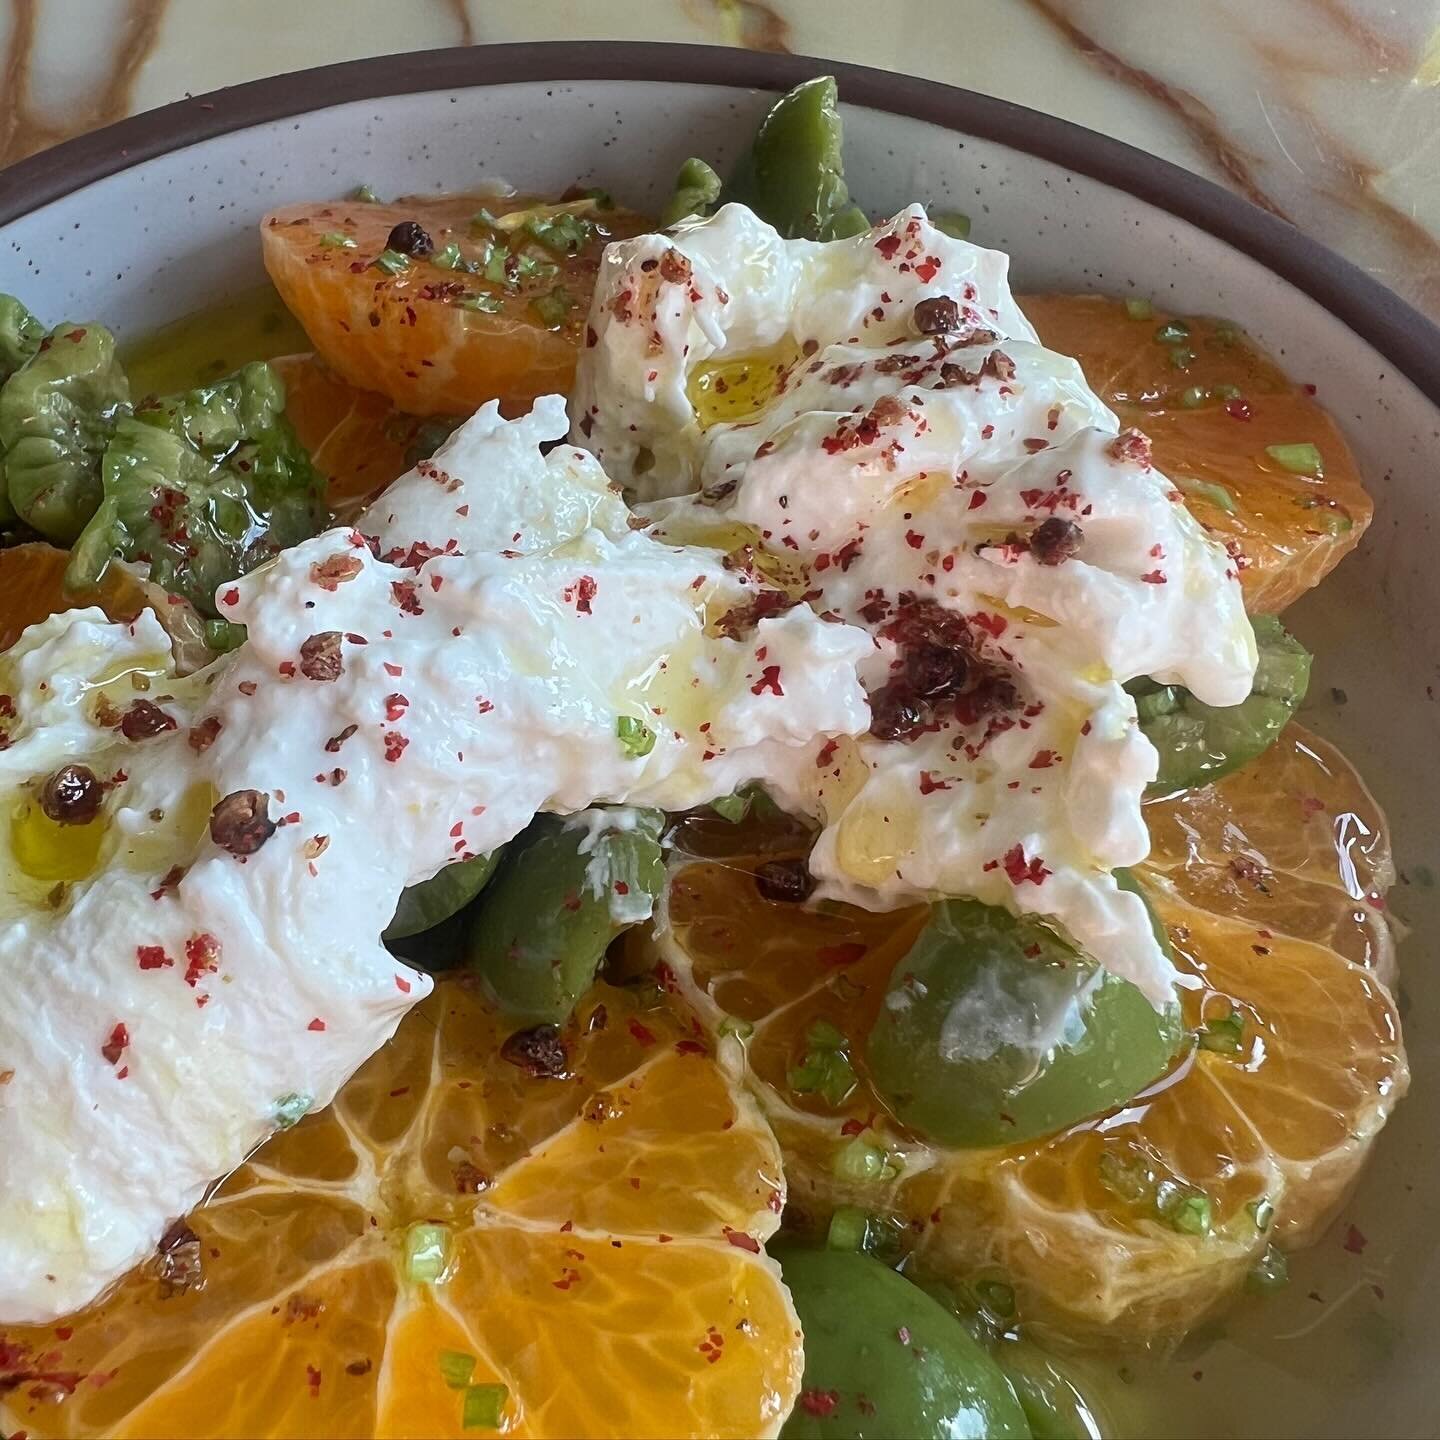 🍊

(Gold nugget tangerine, burrata, olives and pink peppercorn)